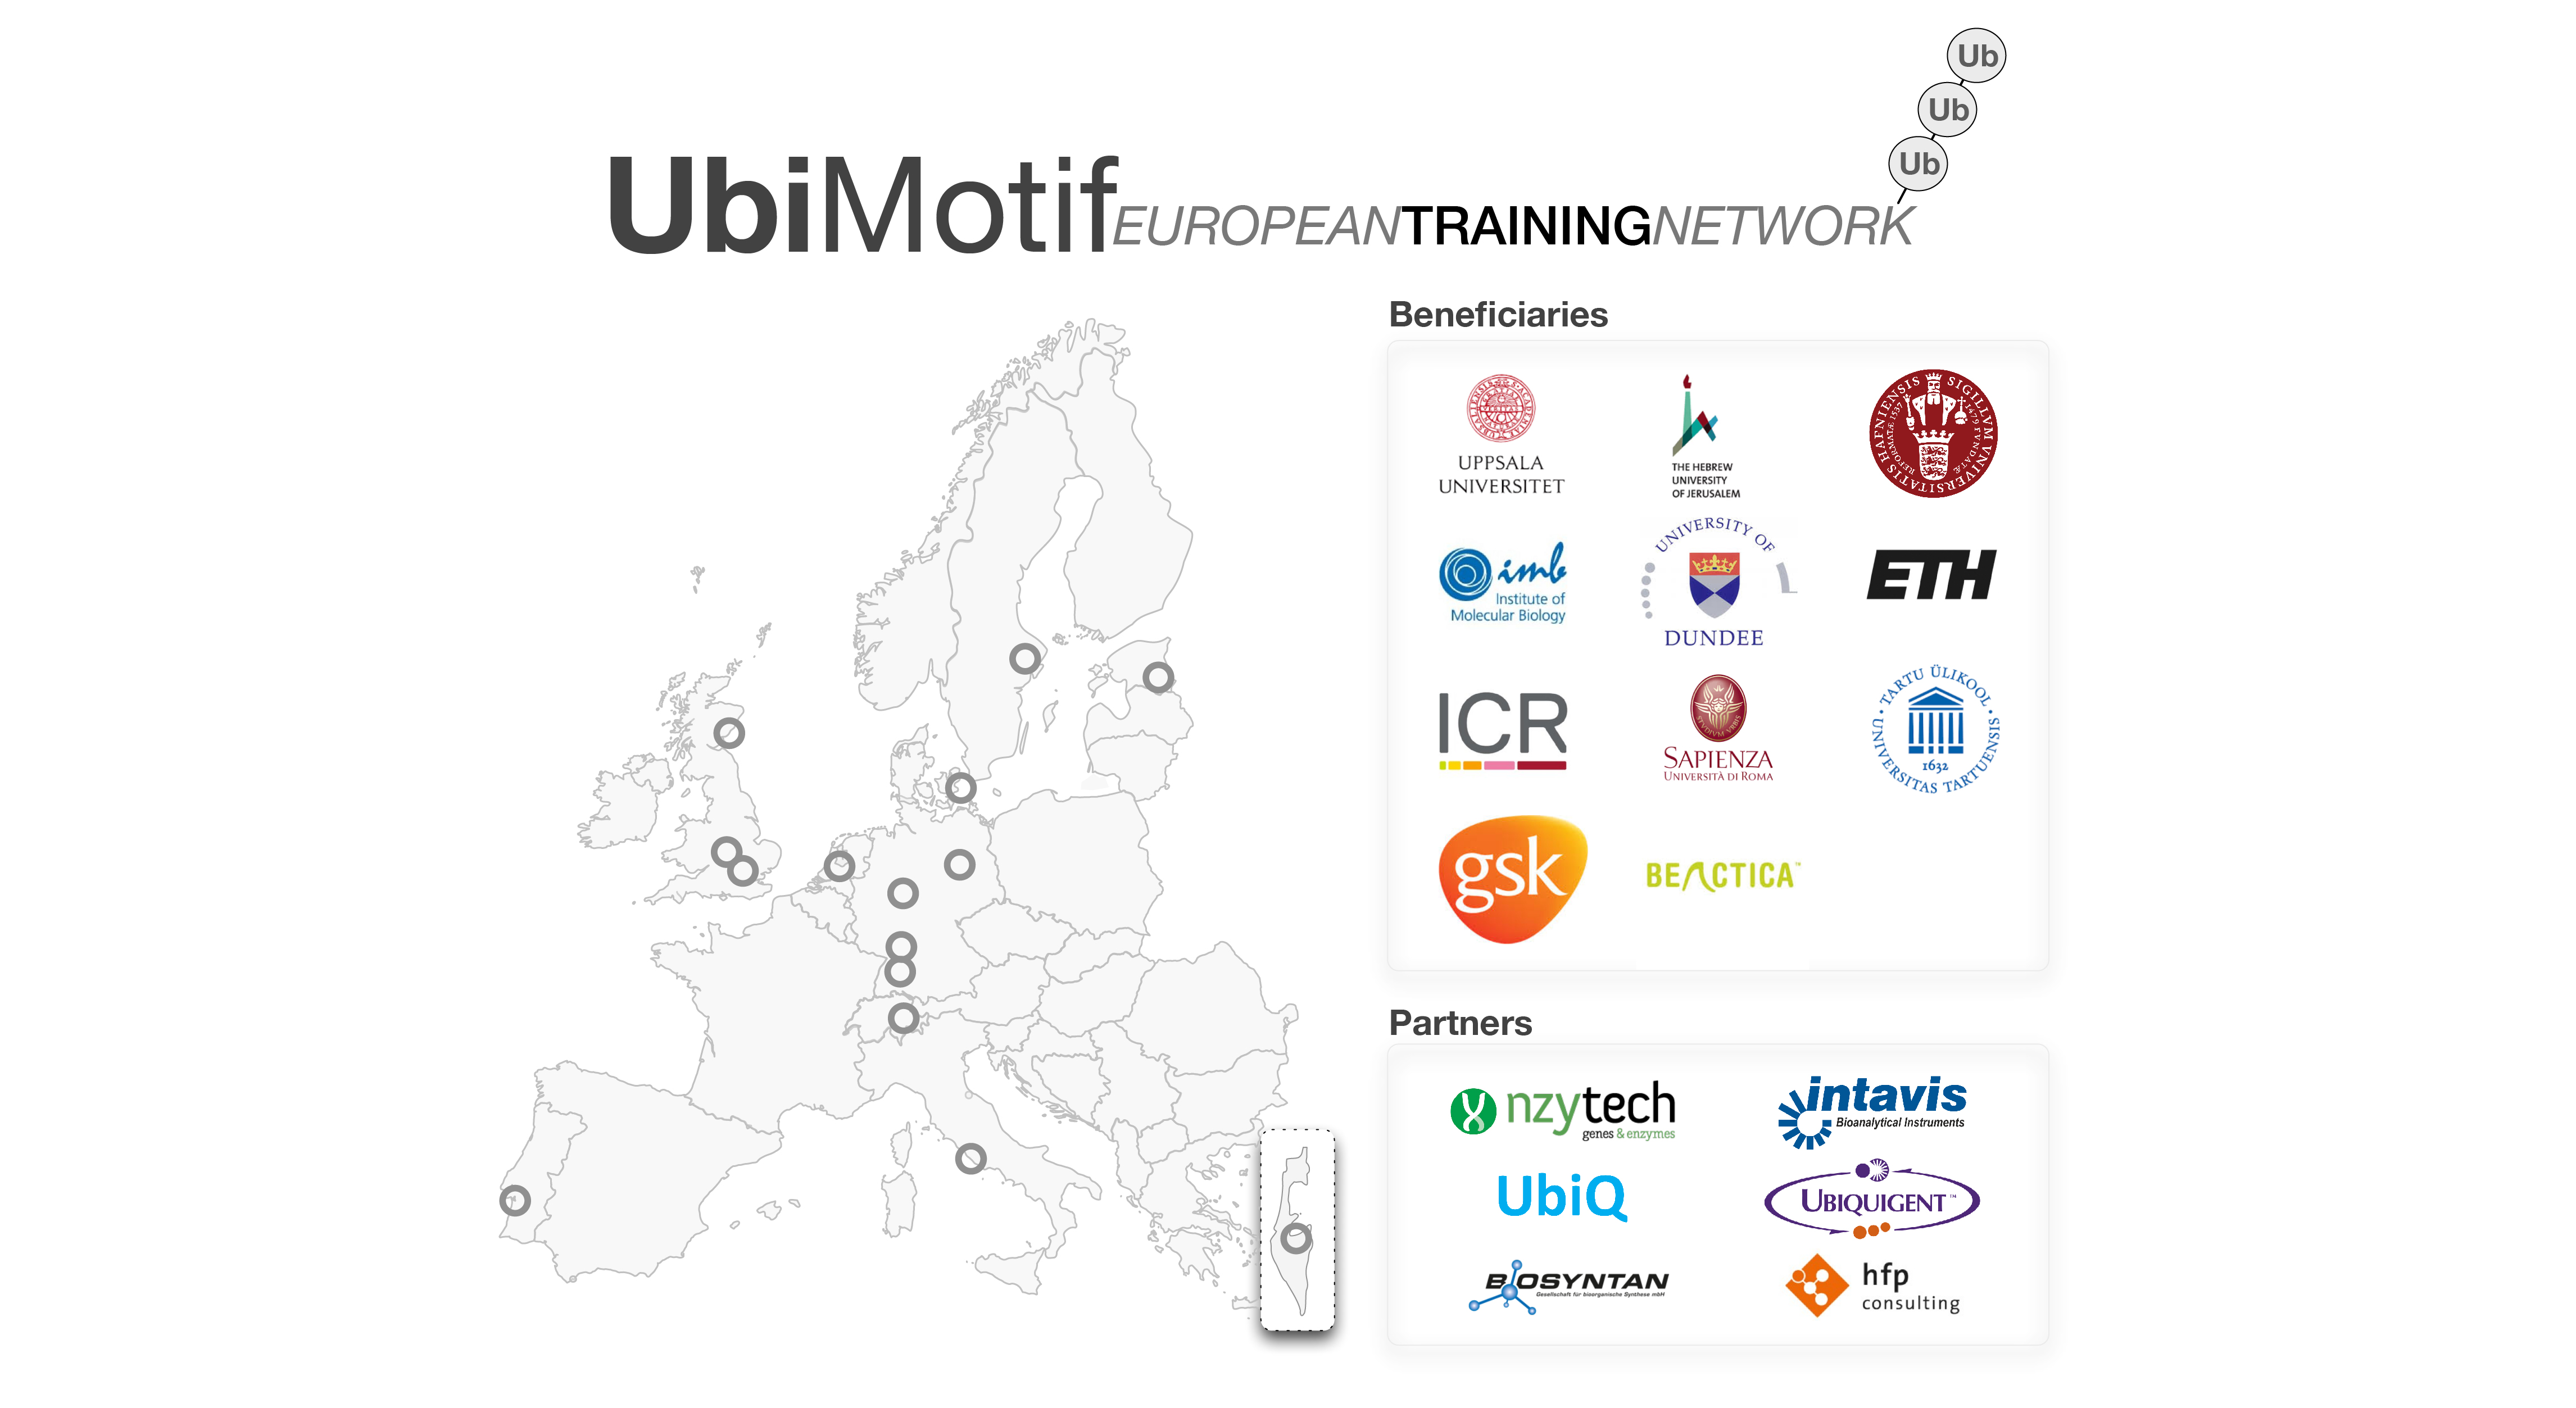 Overview of UBIMOTIF network